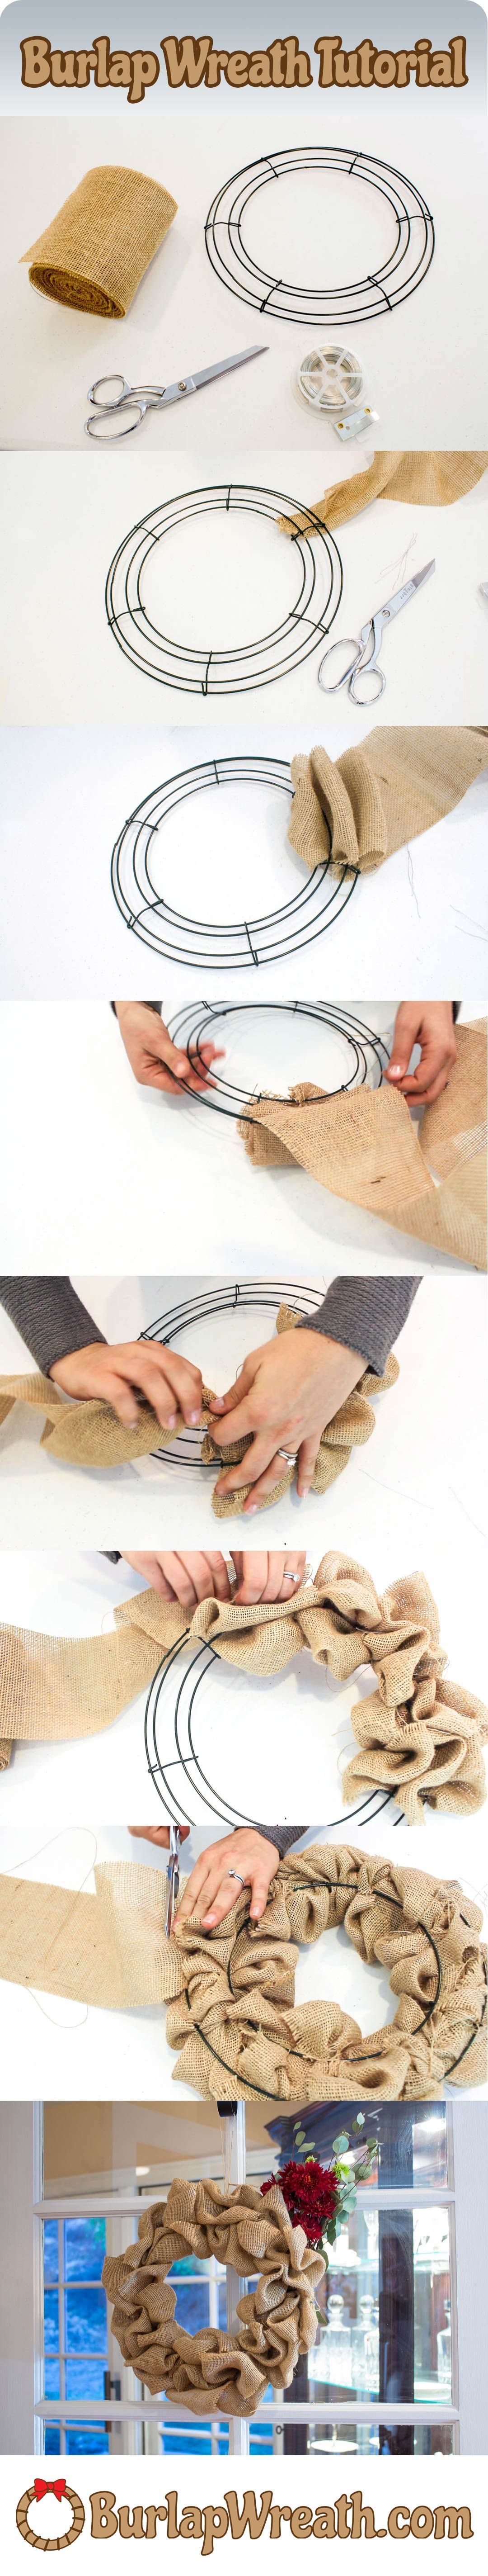 How to make a burlap wreath: Want to make a burlap wreath? Check out this easy to use tutorial showing you how to make a burlap